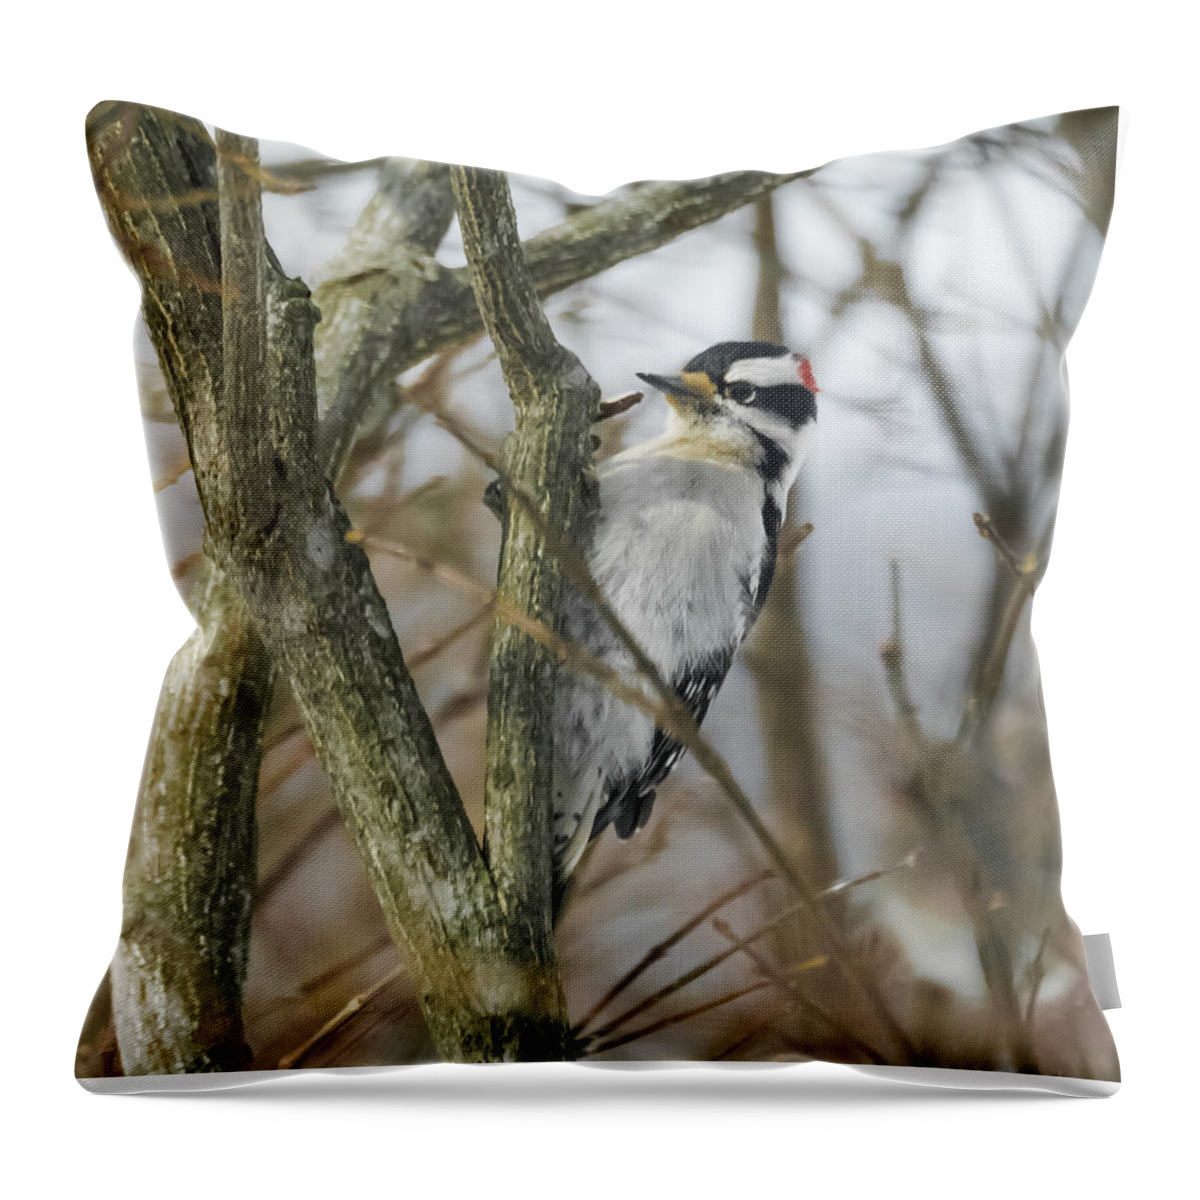 Woodpecker Throw Pillow featuring the photograph Downy Woodpecker by Holden The Moment